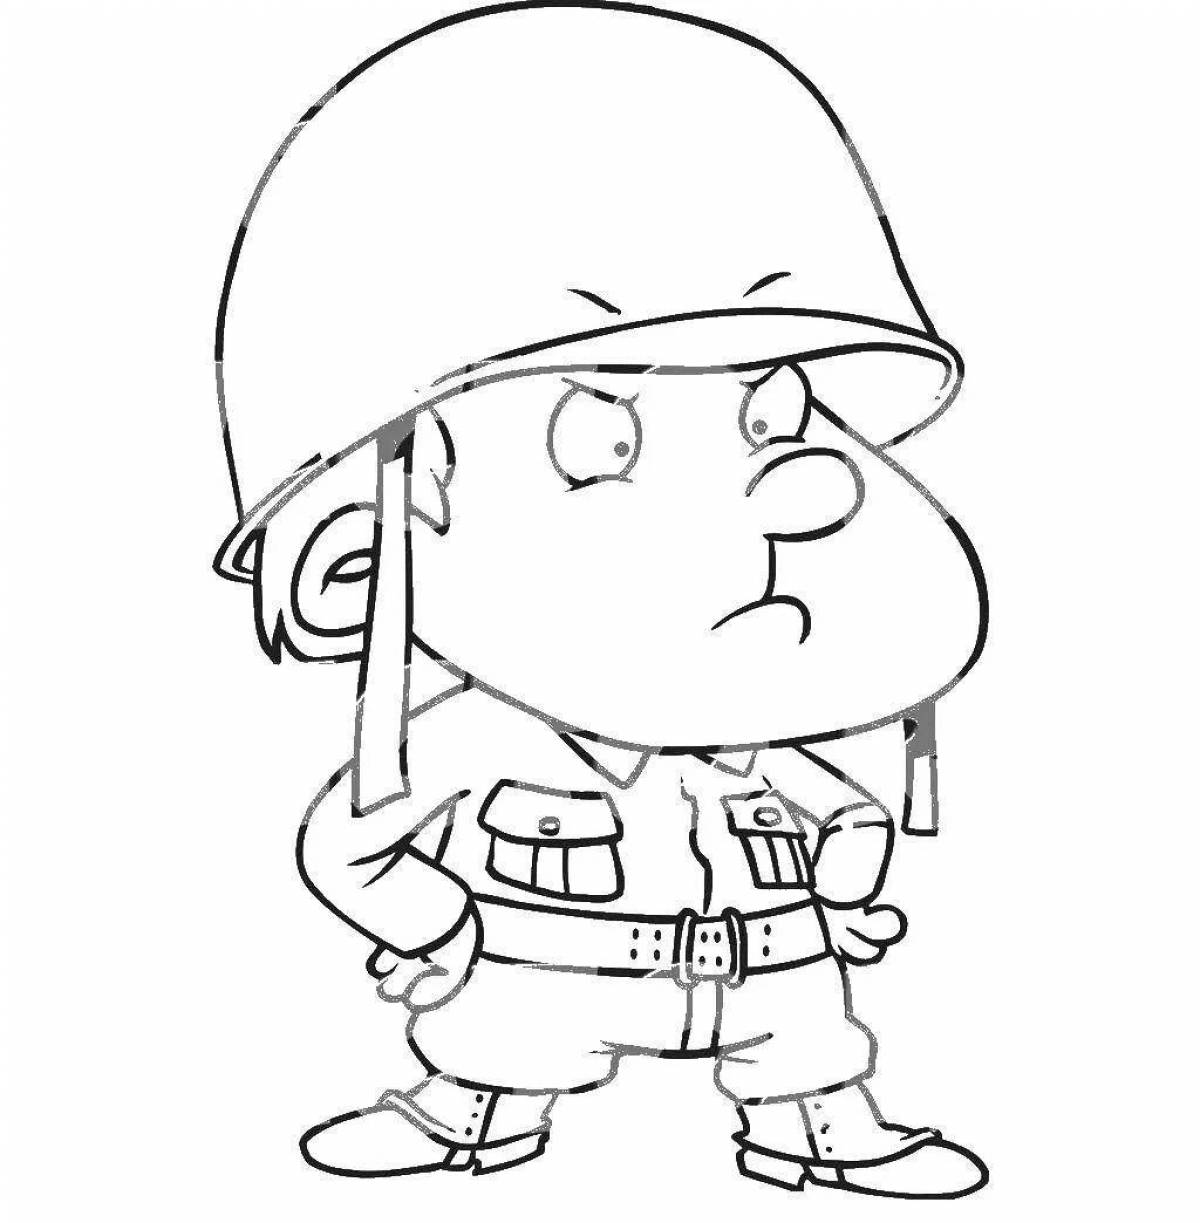 Steady Soldier Face Coloring Page